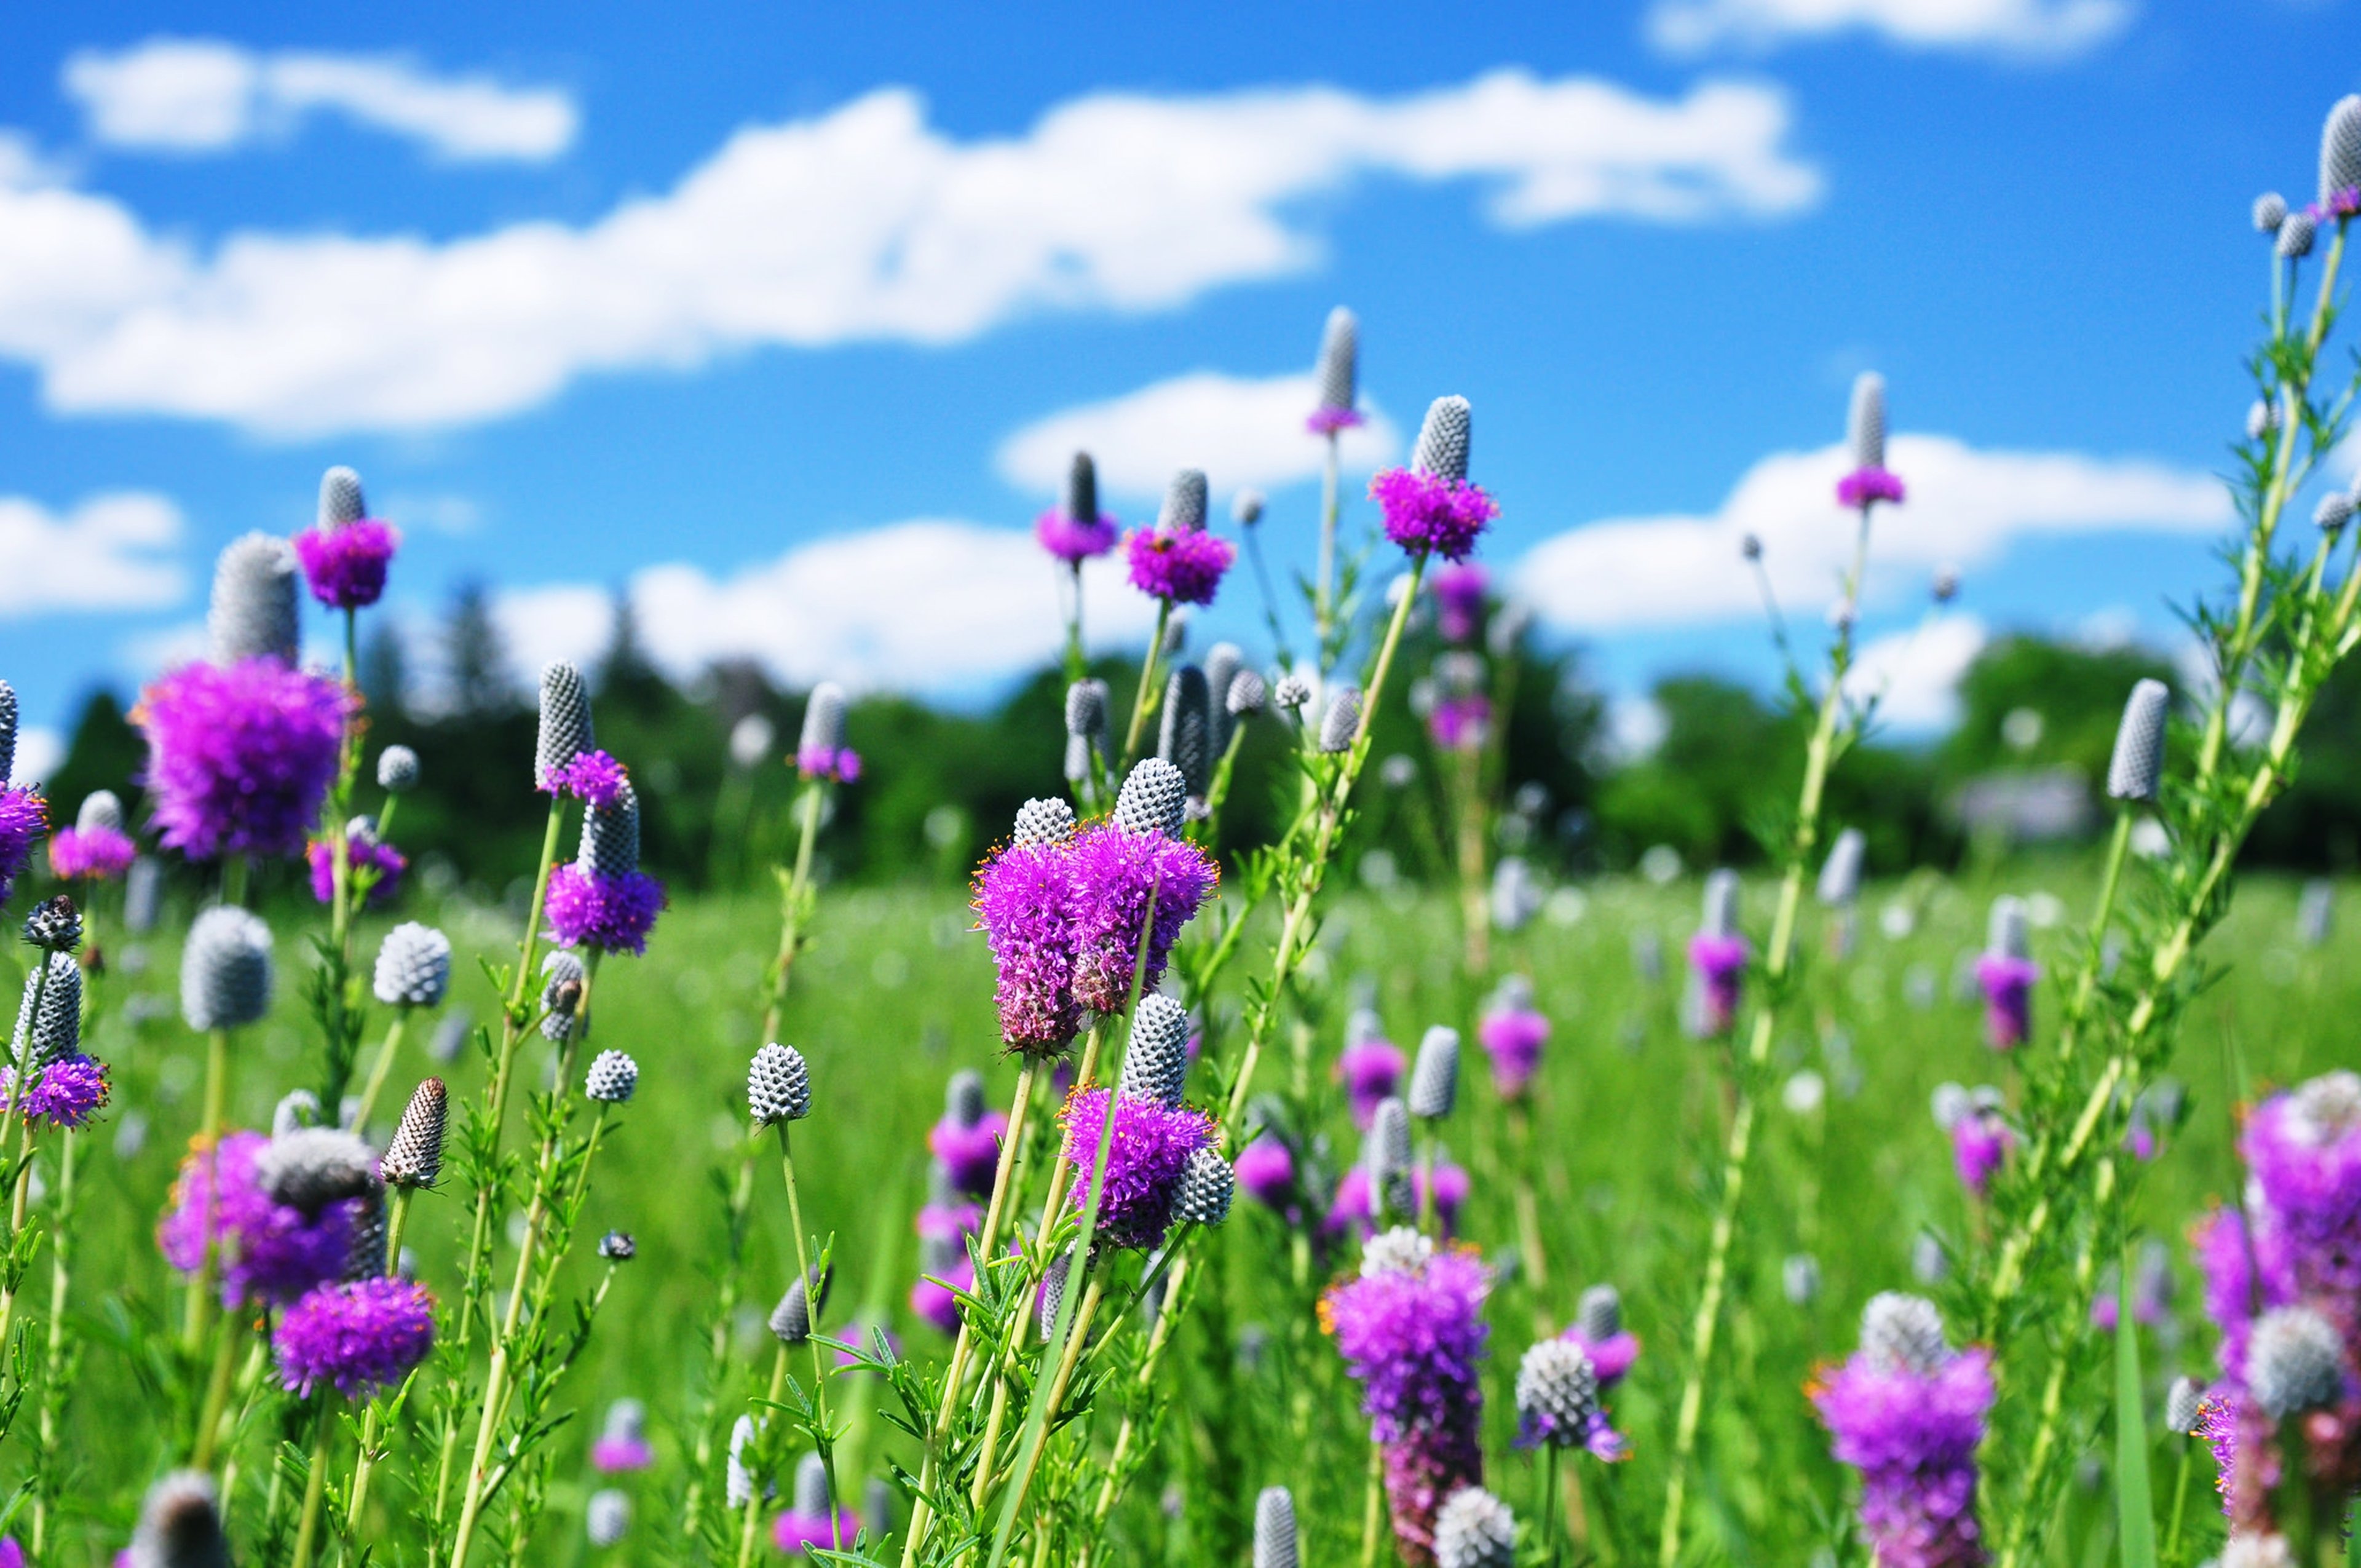 fields, Flowers, Plants, Landscapes, Nature, Earth, Life, Countryside, Sky, Clouds, Green, Blue, Spring, Joy, Fun Wallpaper